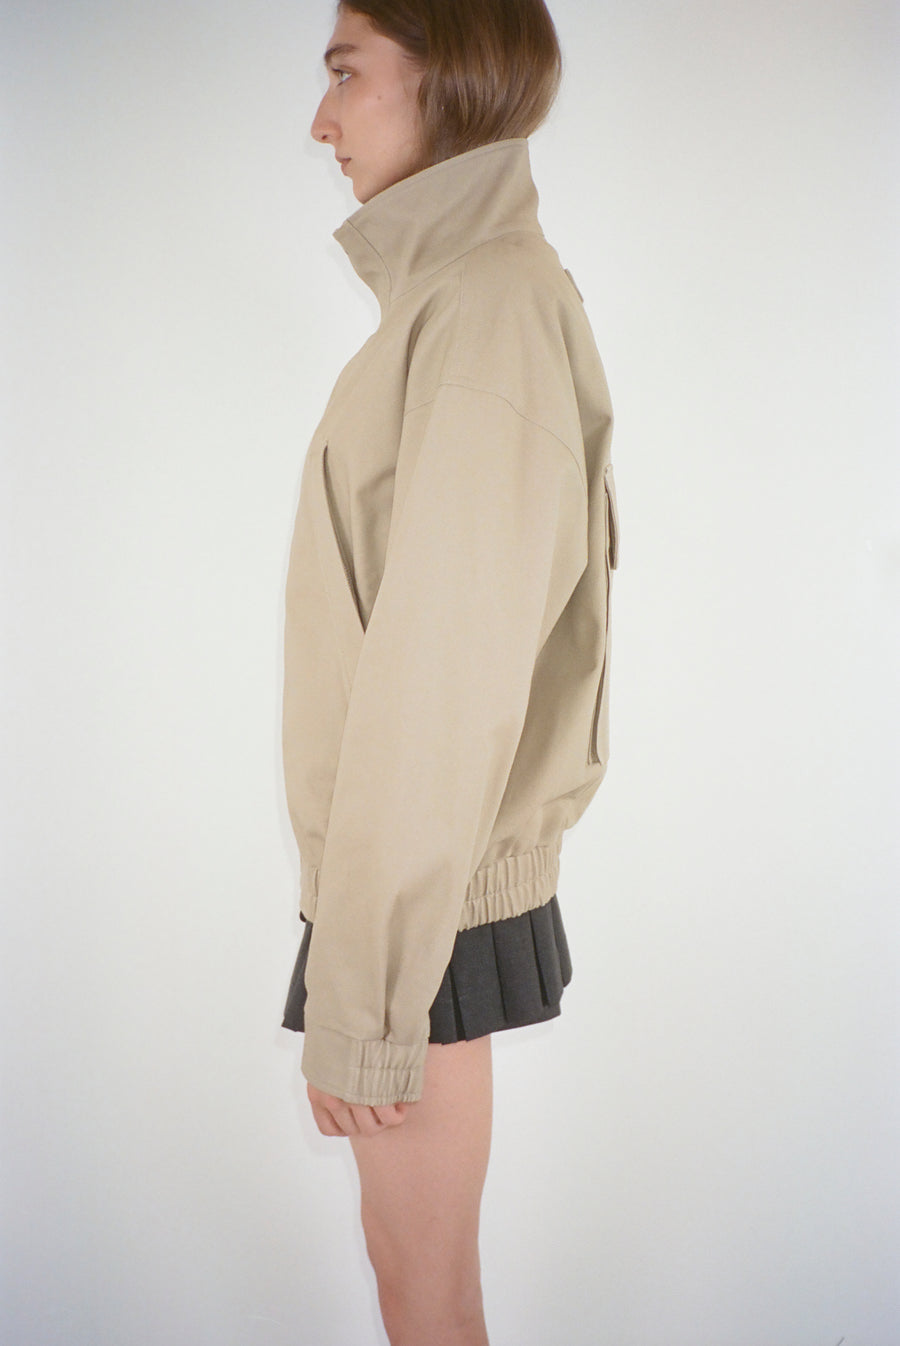 Oversized jacket in taupe with pockets at chest on model